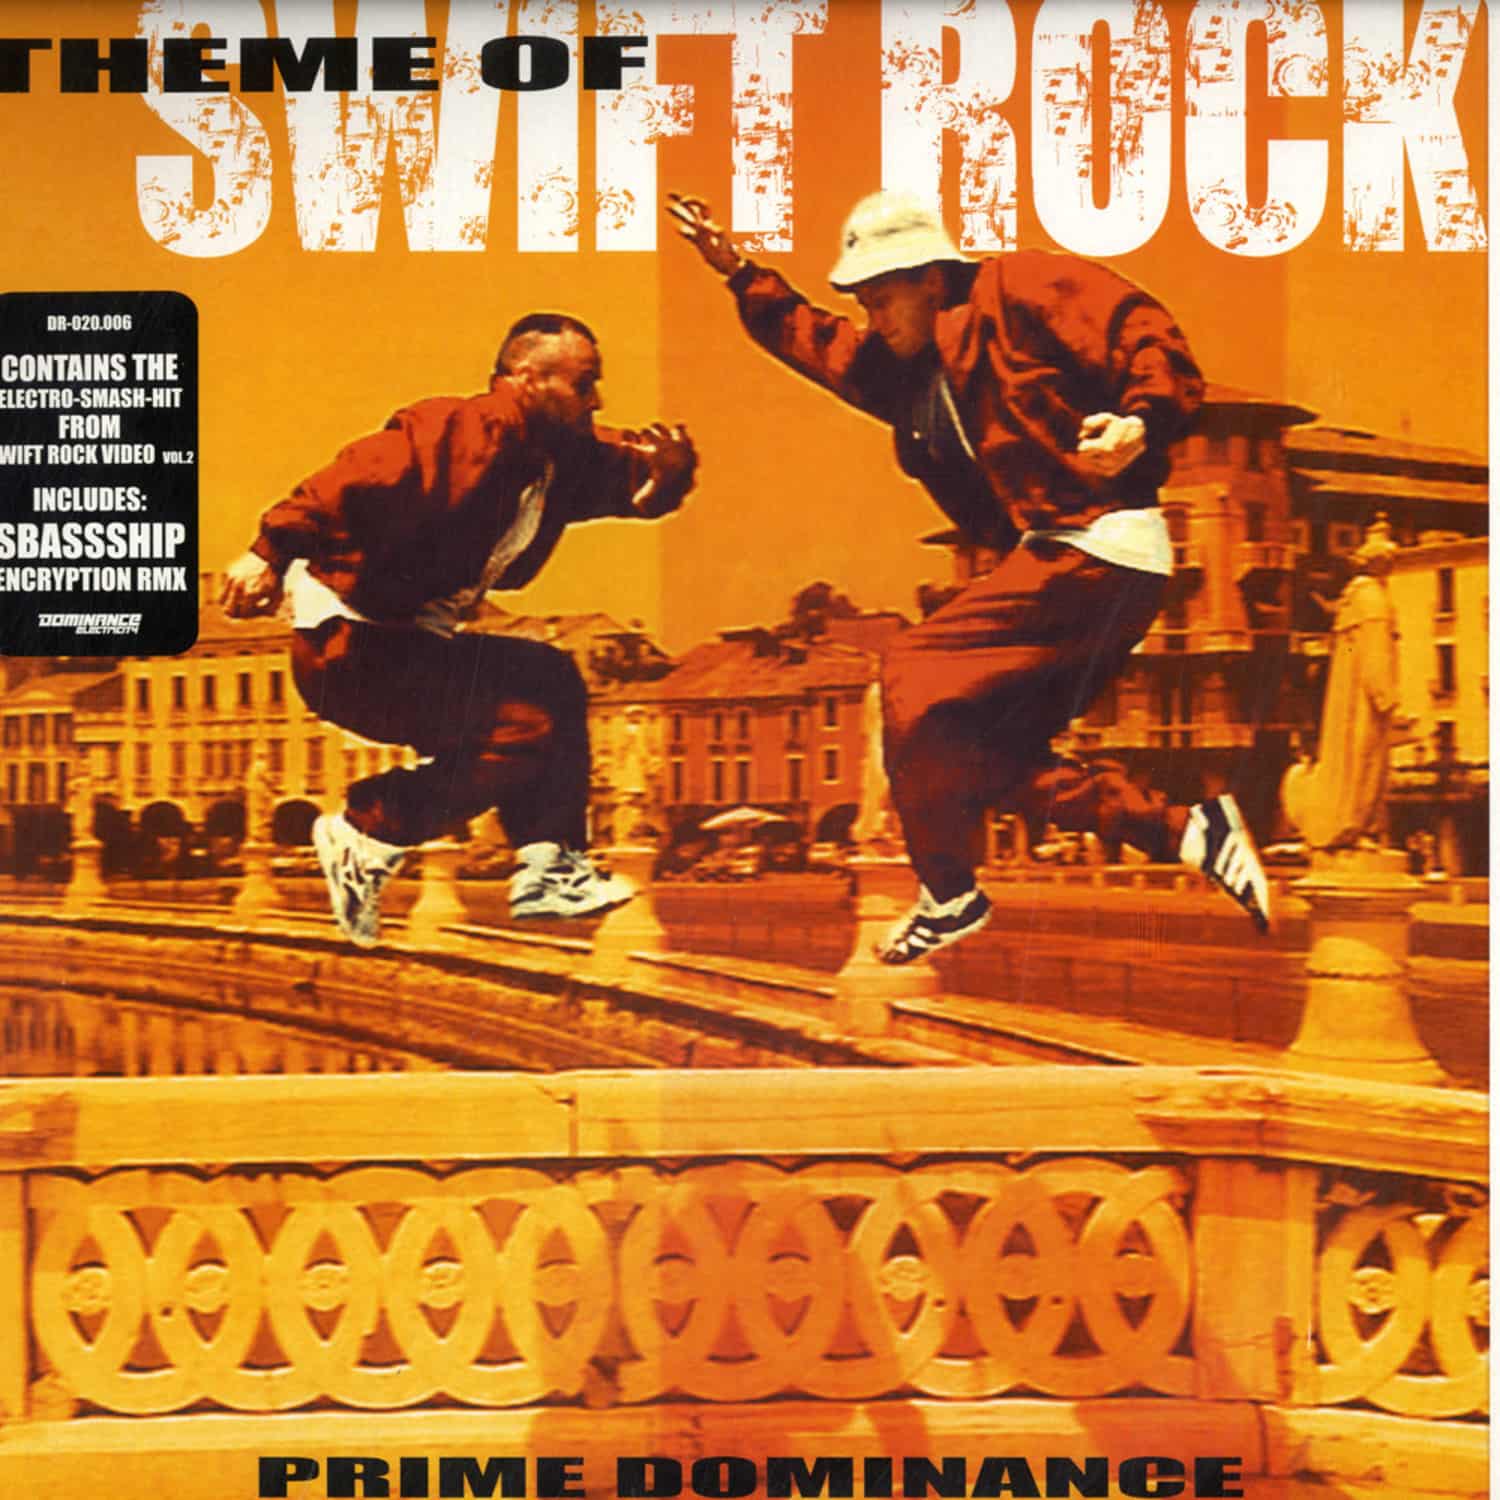 Prime Domiance - THEME OF SWIFT ROCK